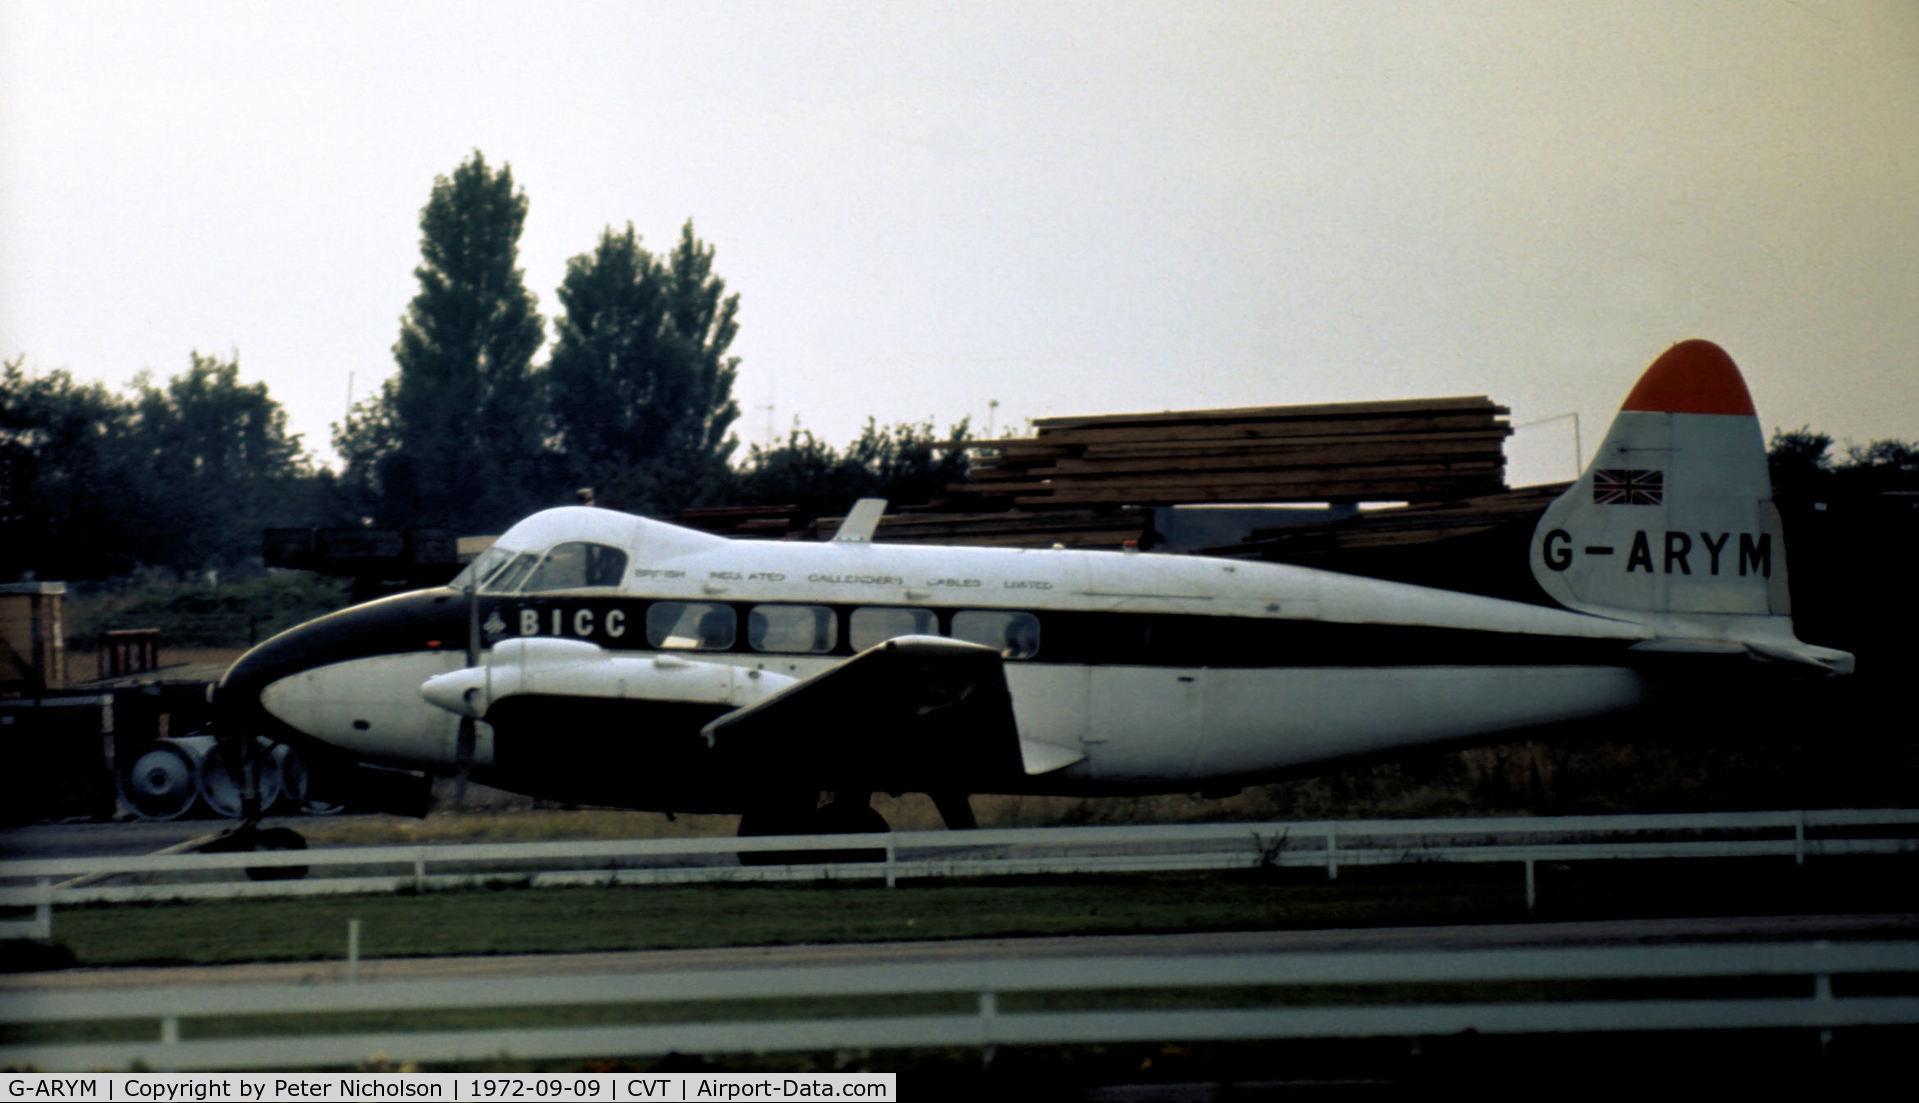 G-ARYM, 1962 De Havilland DH-104 Dove 8 C/N 04529, Dove 8 of British Insulated Callander Cables as seen at Coventry in September 1972.